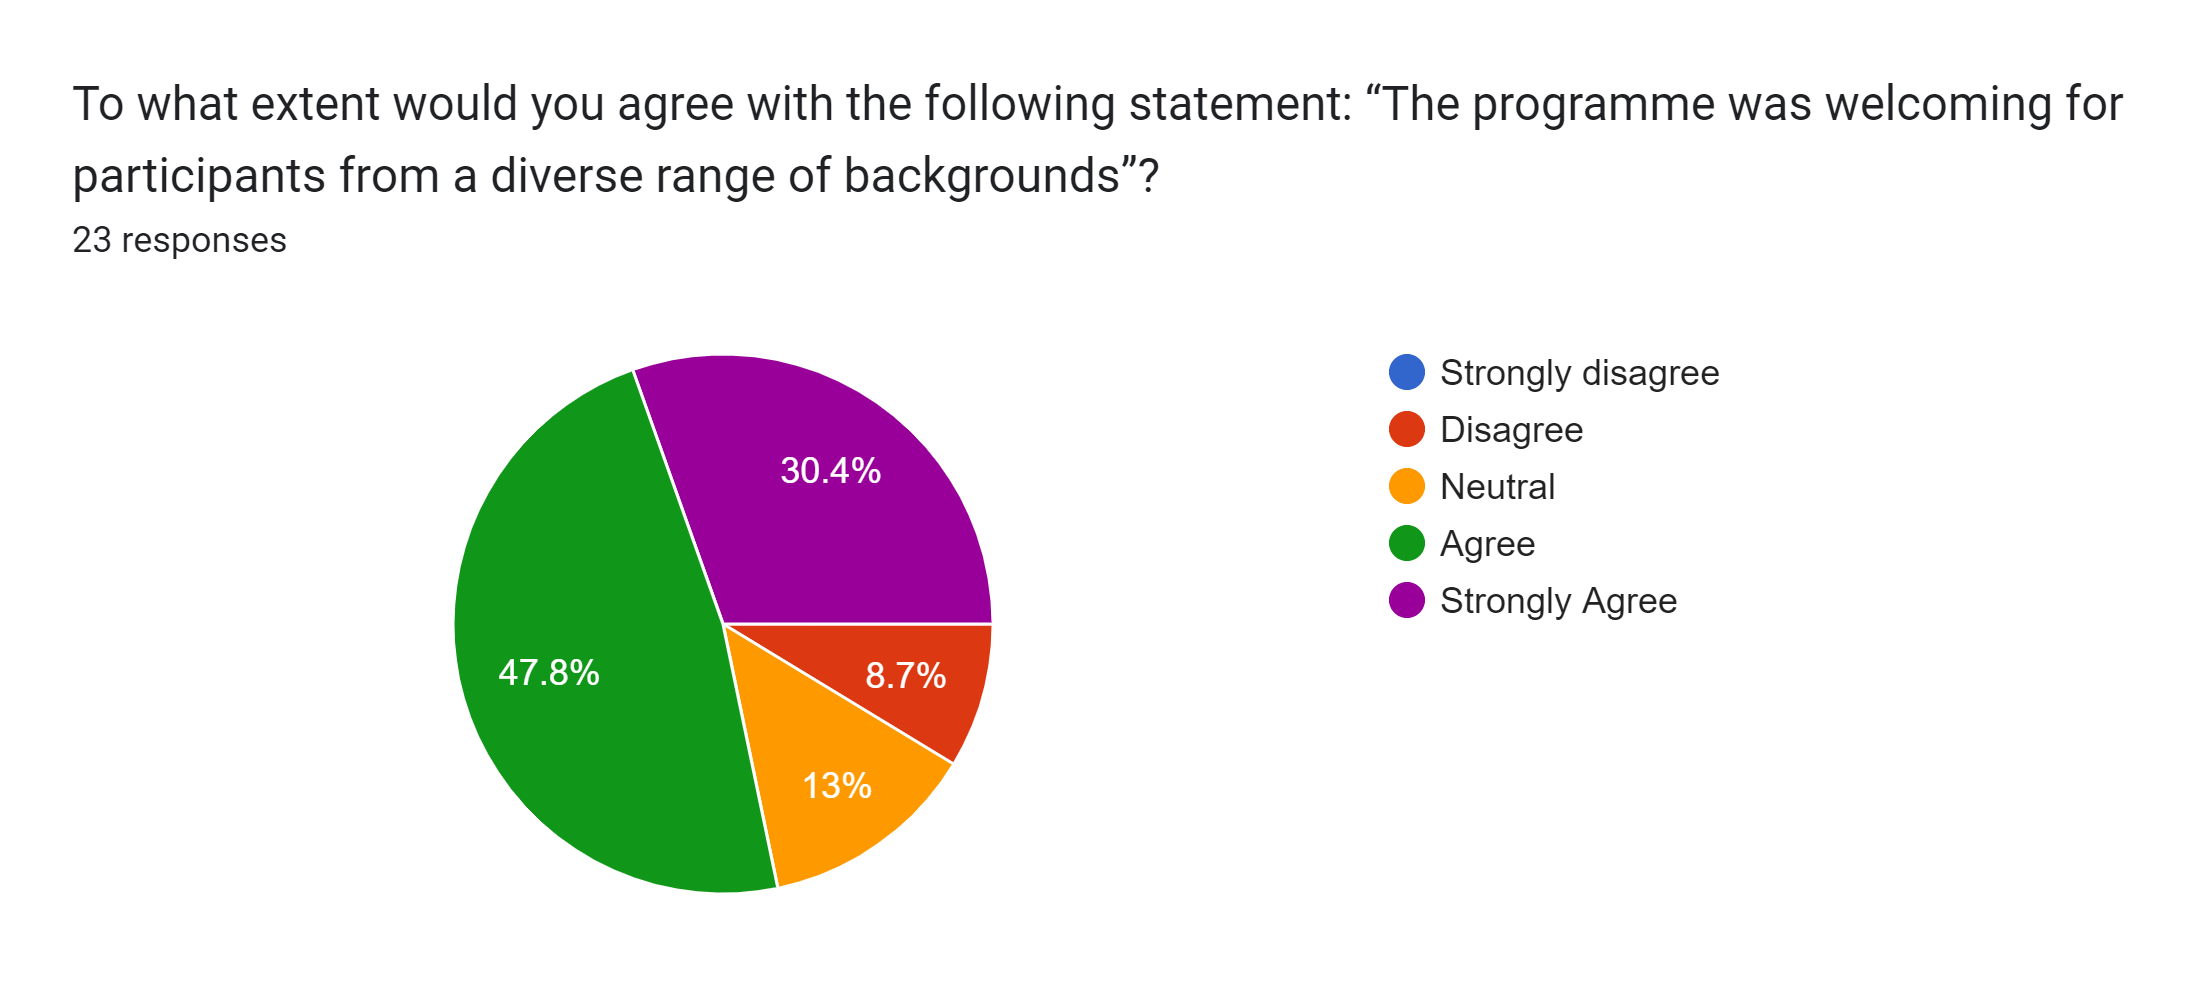 Forms response chart. Question title: To what extent would you agree with the following statement: “The programme was welcoming for participants from a diverse range of backgrounds”?
. Number of responses: 23 responses.